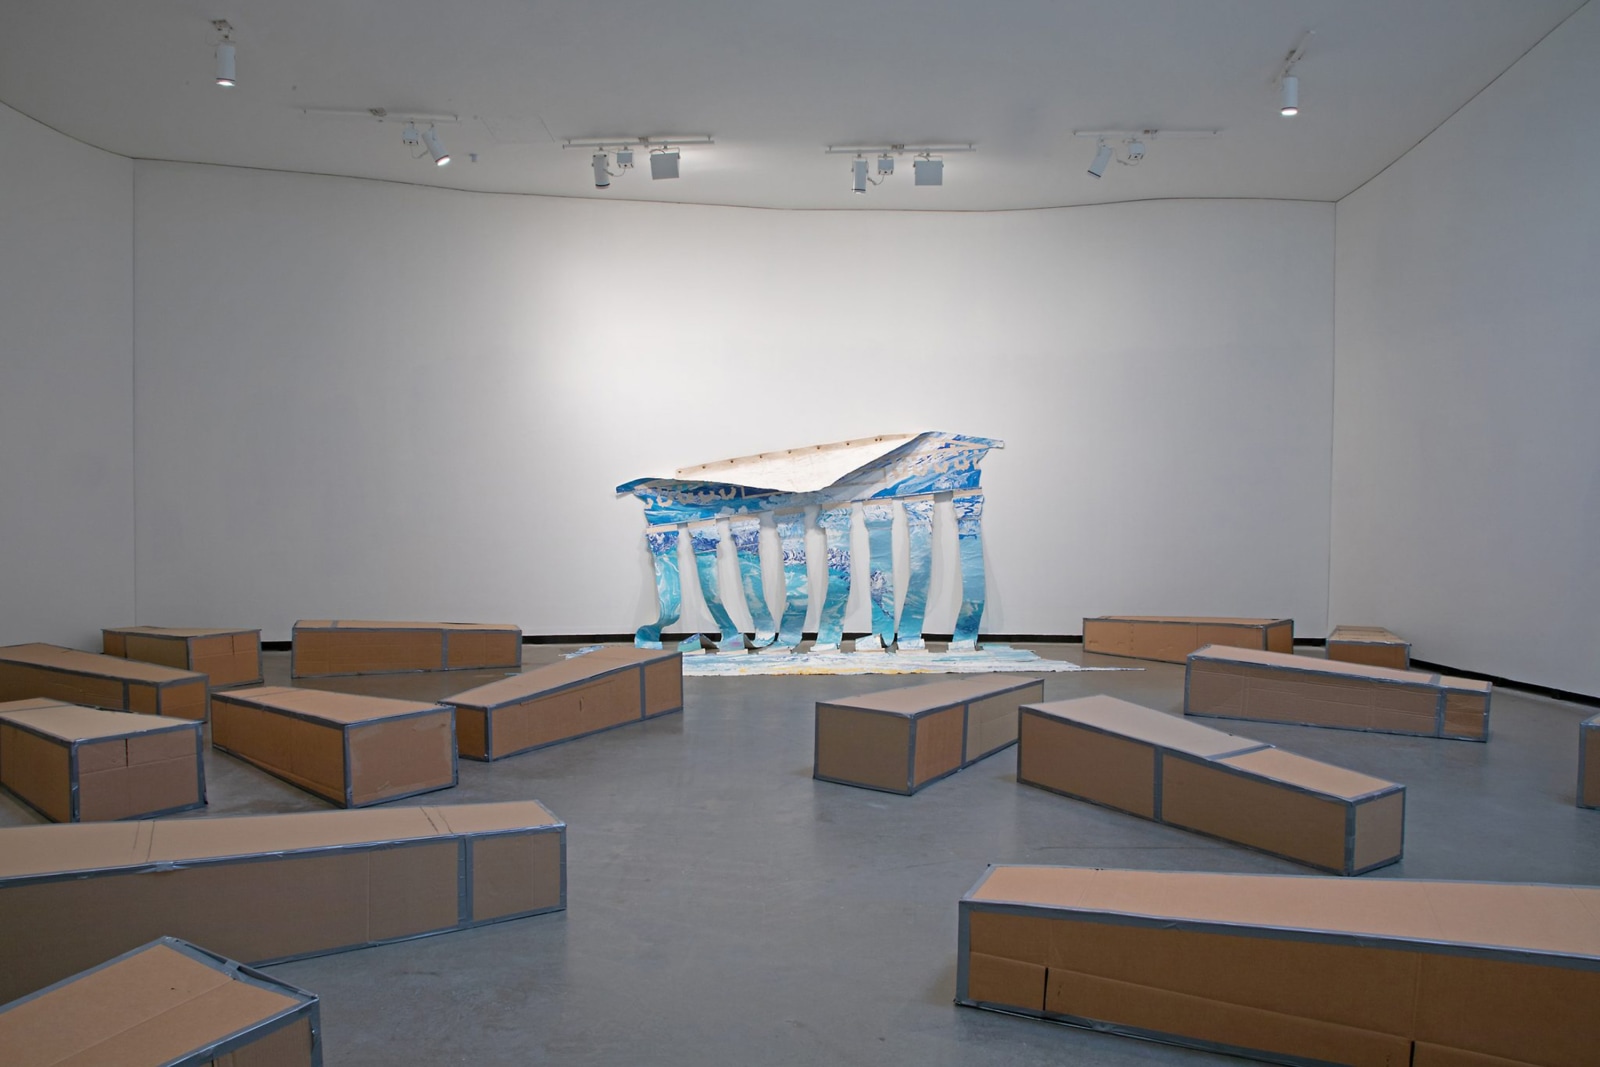 Rodney McMillian - The Land: Not Without a Politic - Viewing Room - Petzel Gallery